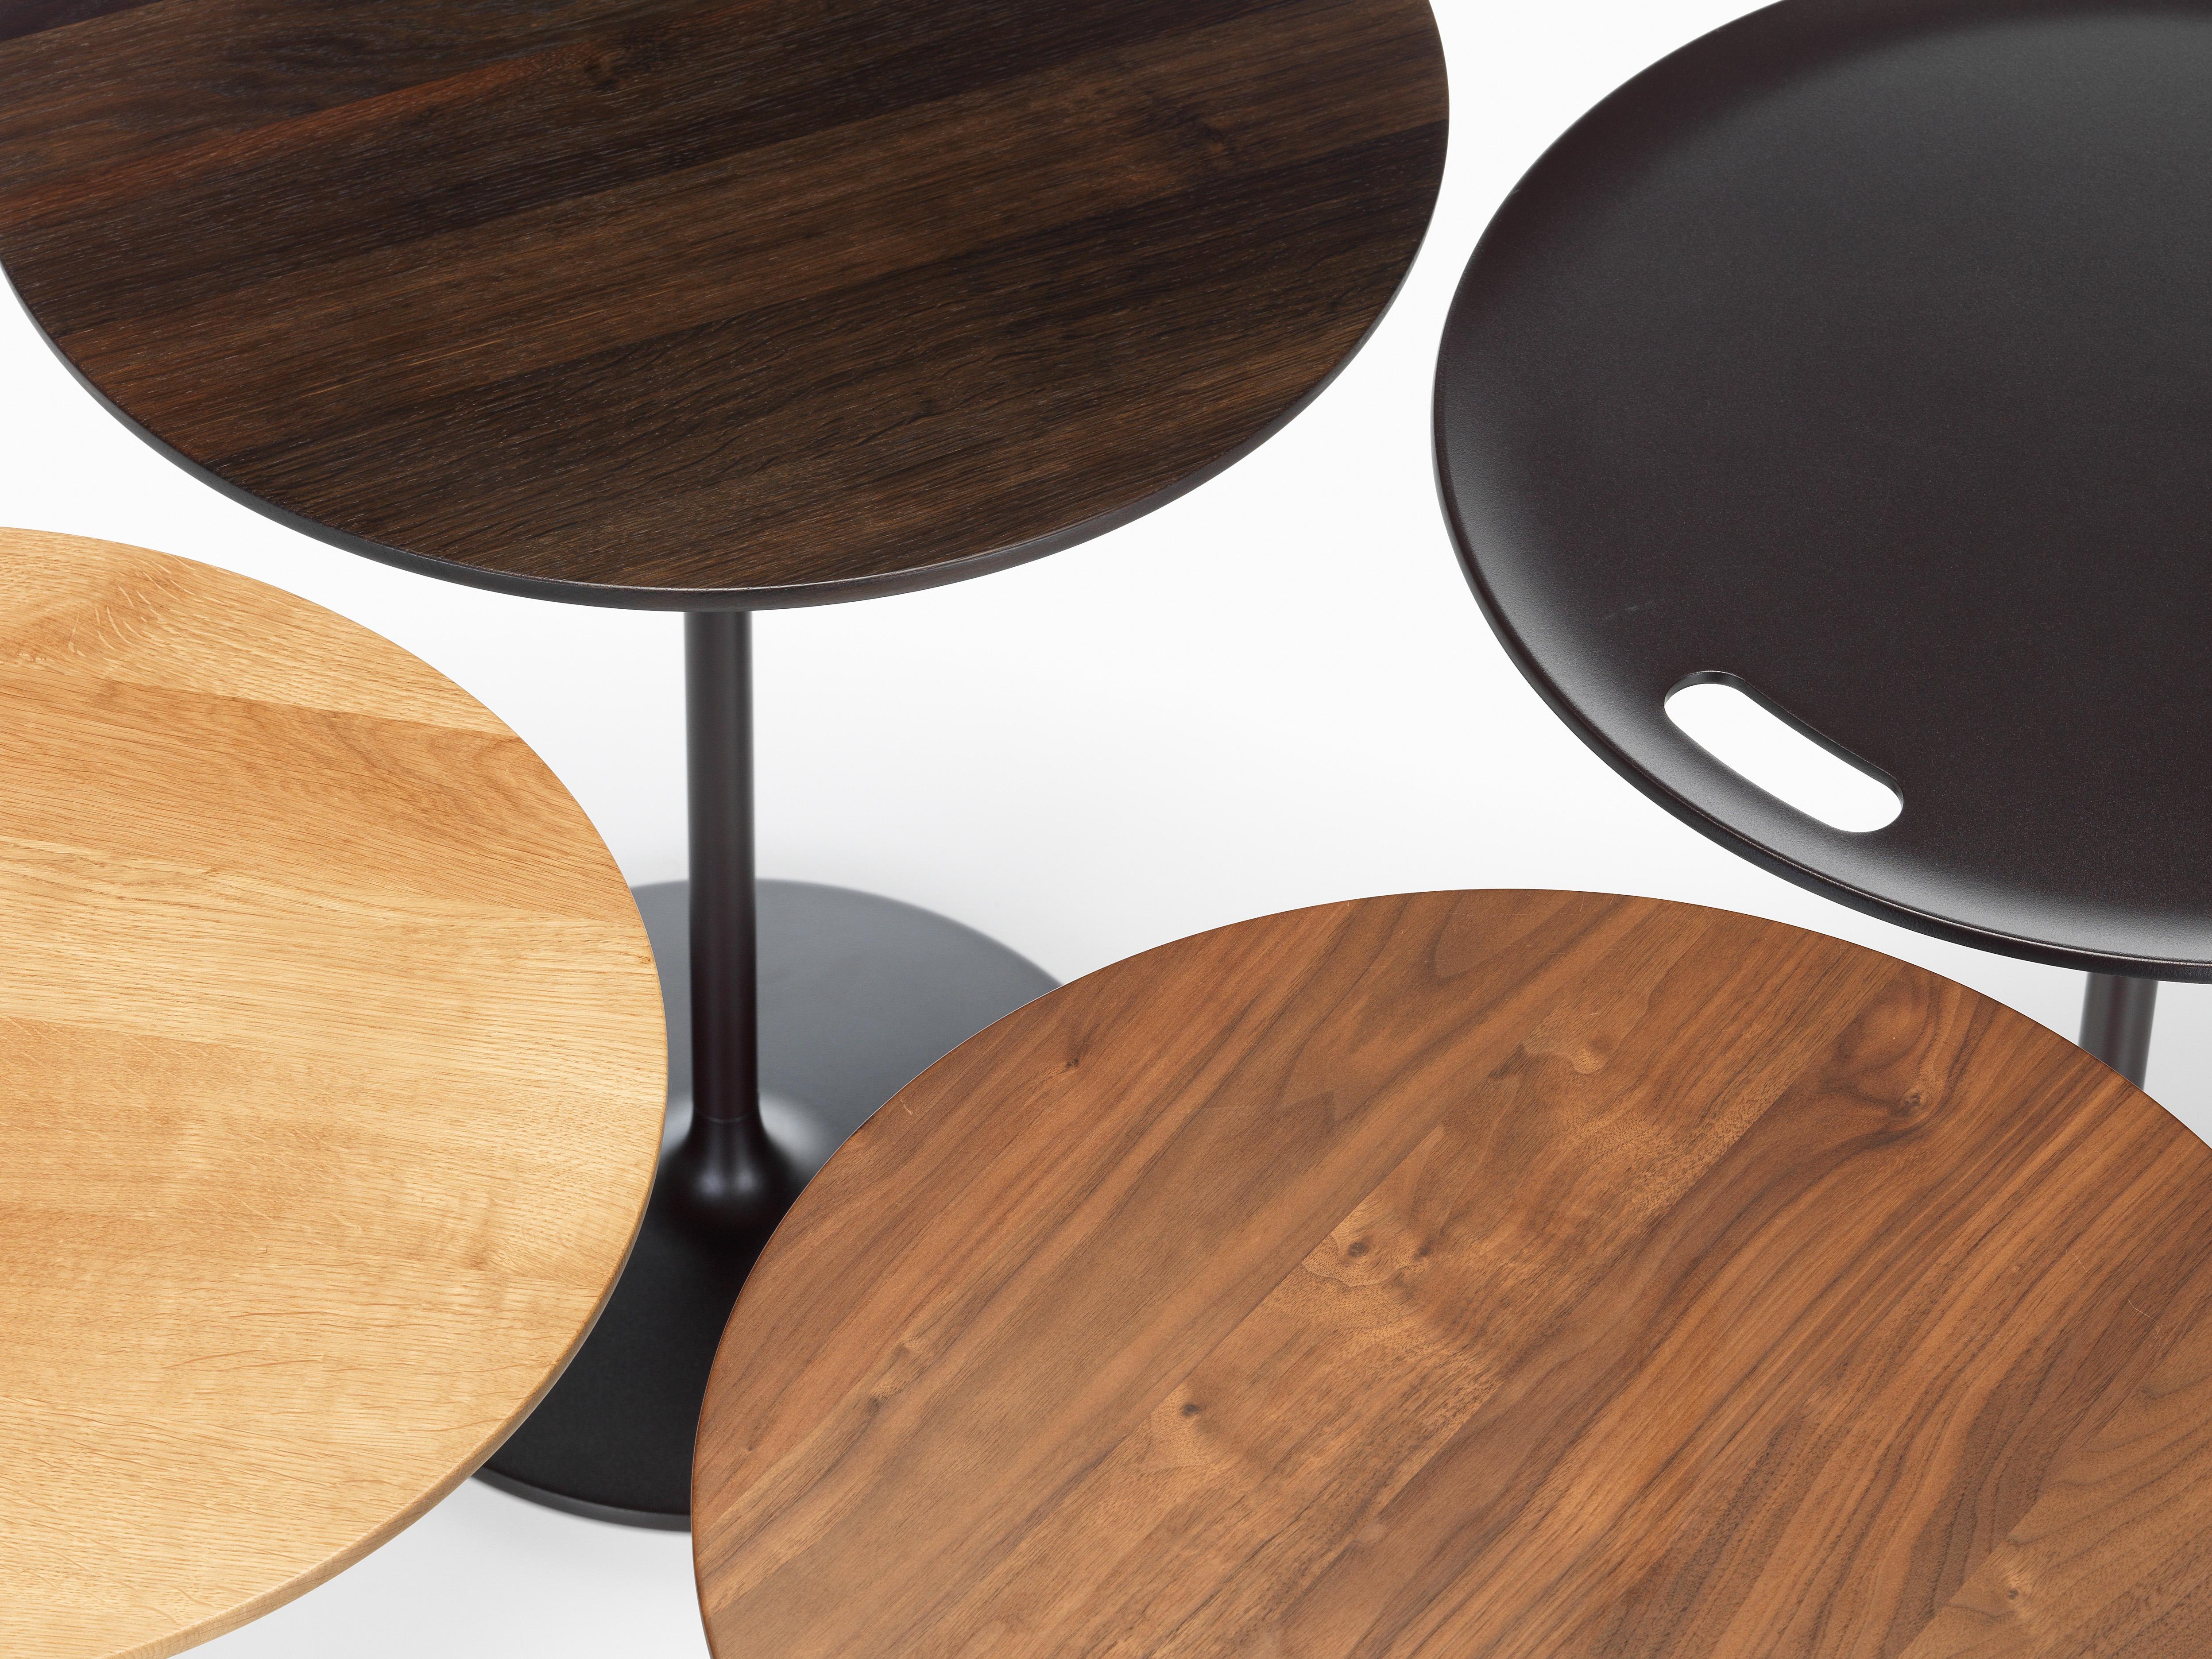 These products are only available in the United States.

The Occasional Tables by Jasper Morrison have an understated look and come in three heights – ranging from a low side table to a standard serving table. They have round, beveled-edge tops